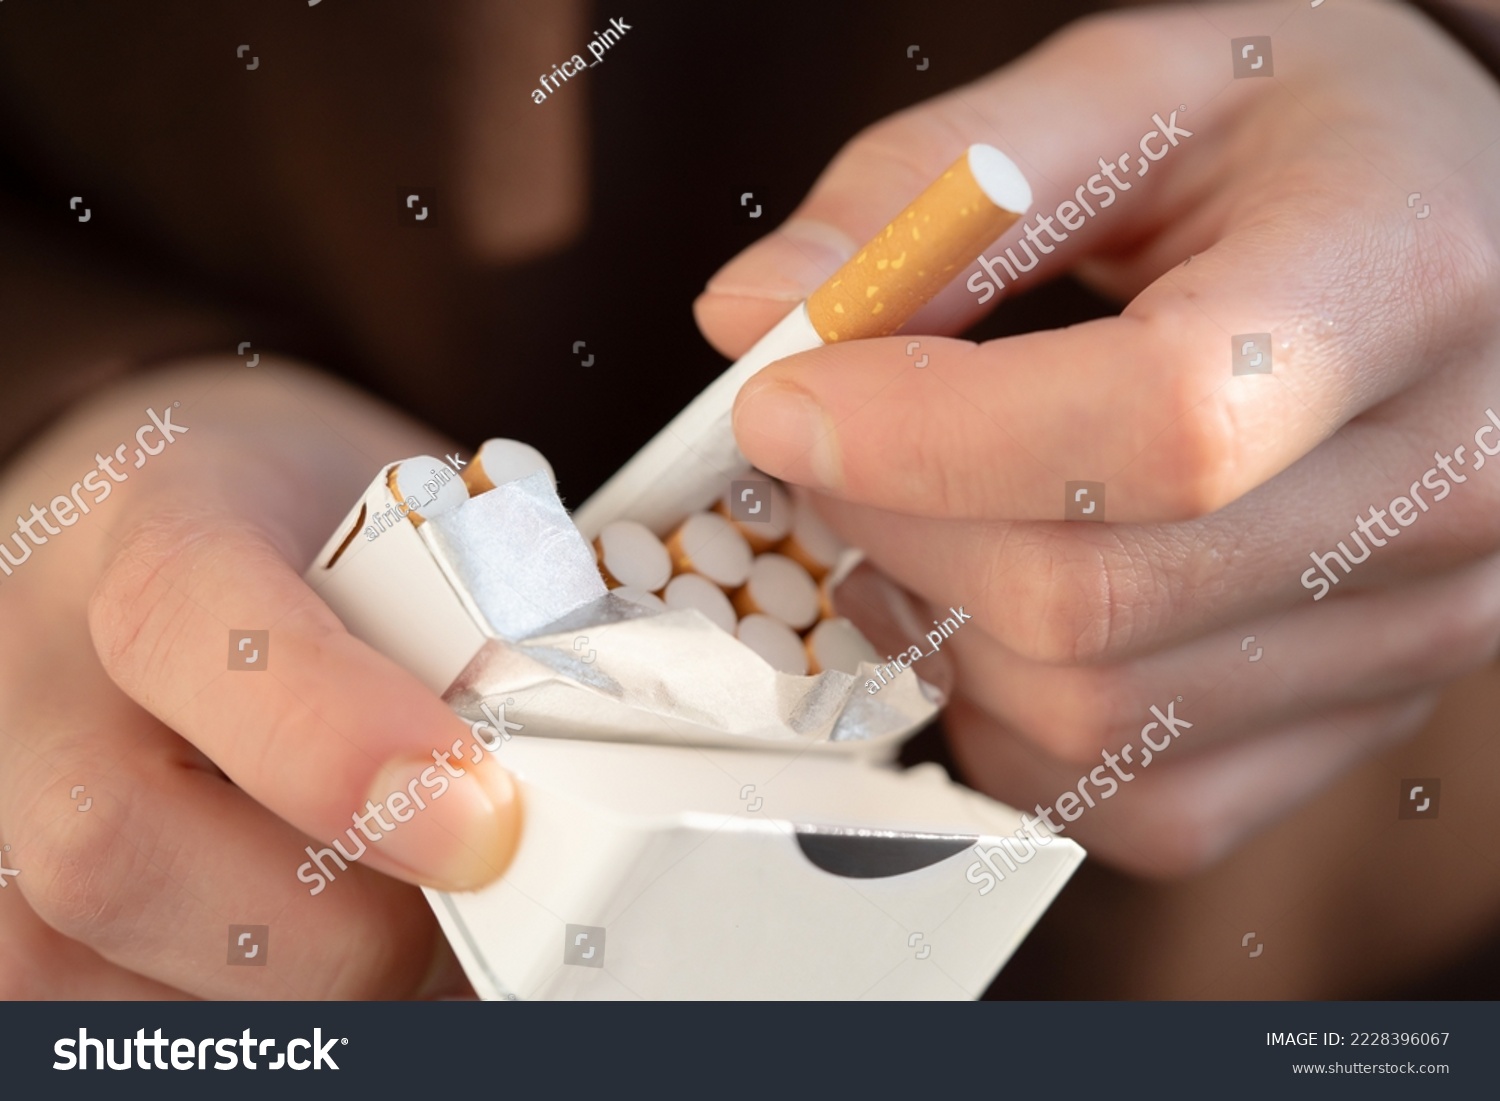 A man holds a pack of cigarettes in his hands, hand with a cigarette closeup. Person with a bad habit that is unhealthy #2228396067